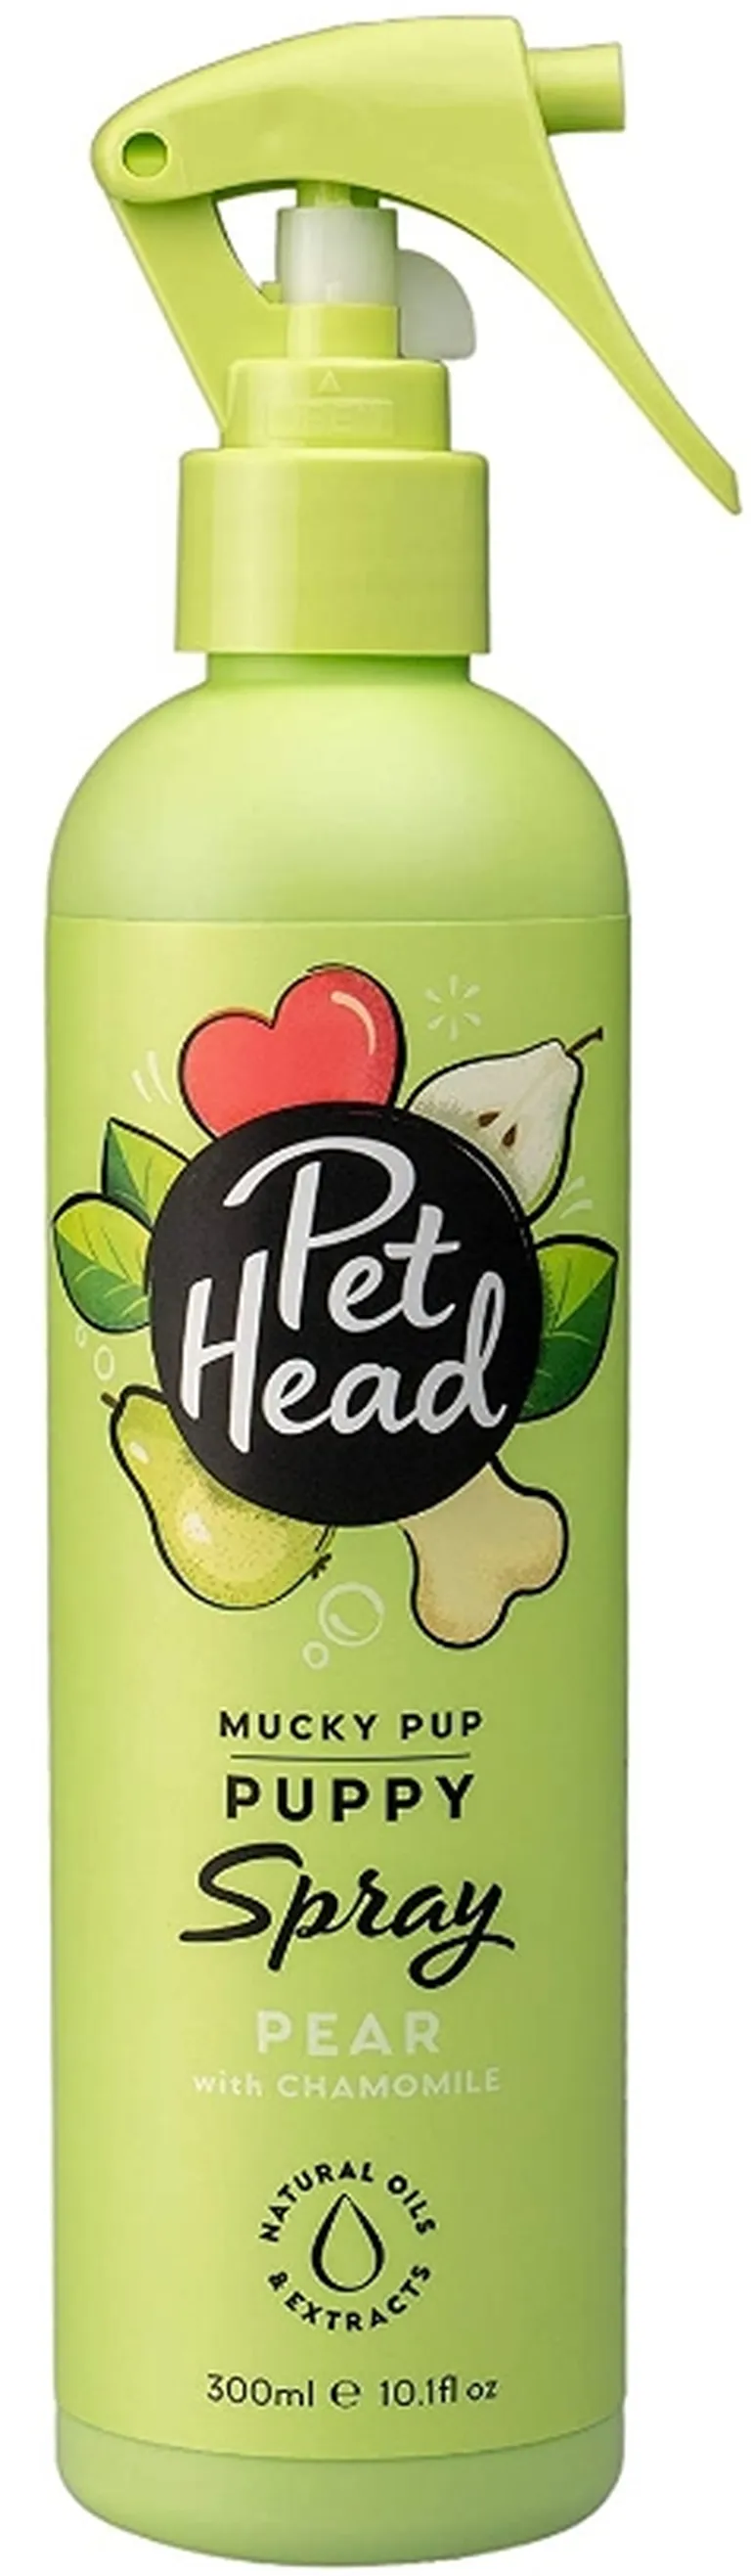 Pet Head Mucky Pup Puppy Spray Pear with Chamomile Photo 1